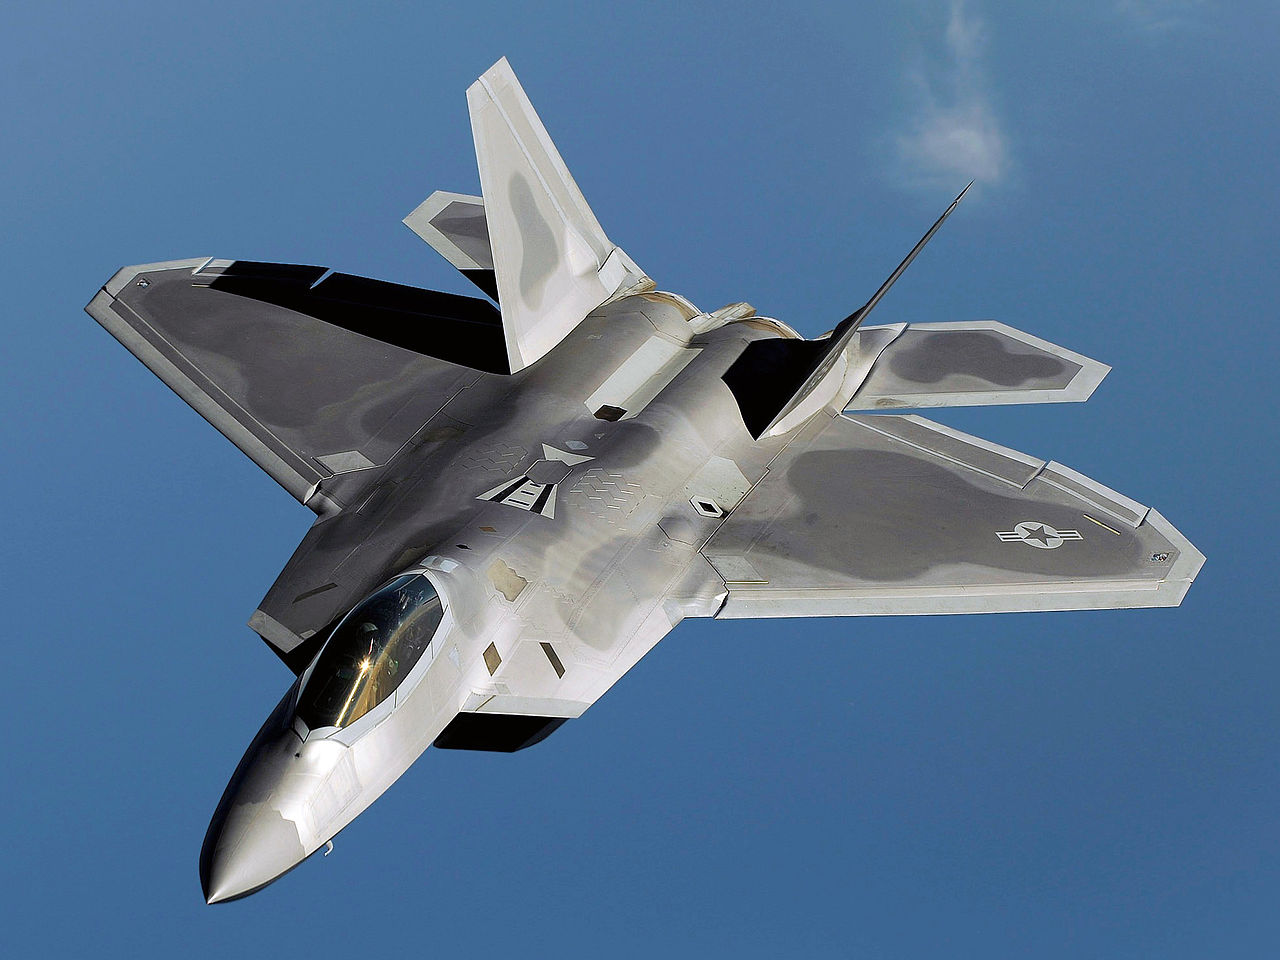 AMERICA IS GOING TO LAUNCH SIX SIXTH-GENERATION HIGHLY ADVANCED COMBAT AIRCRAFT